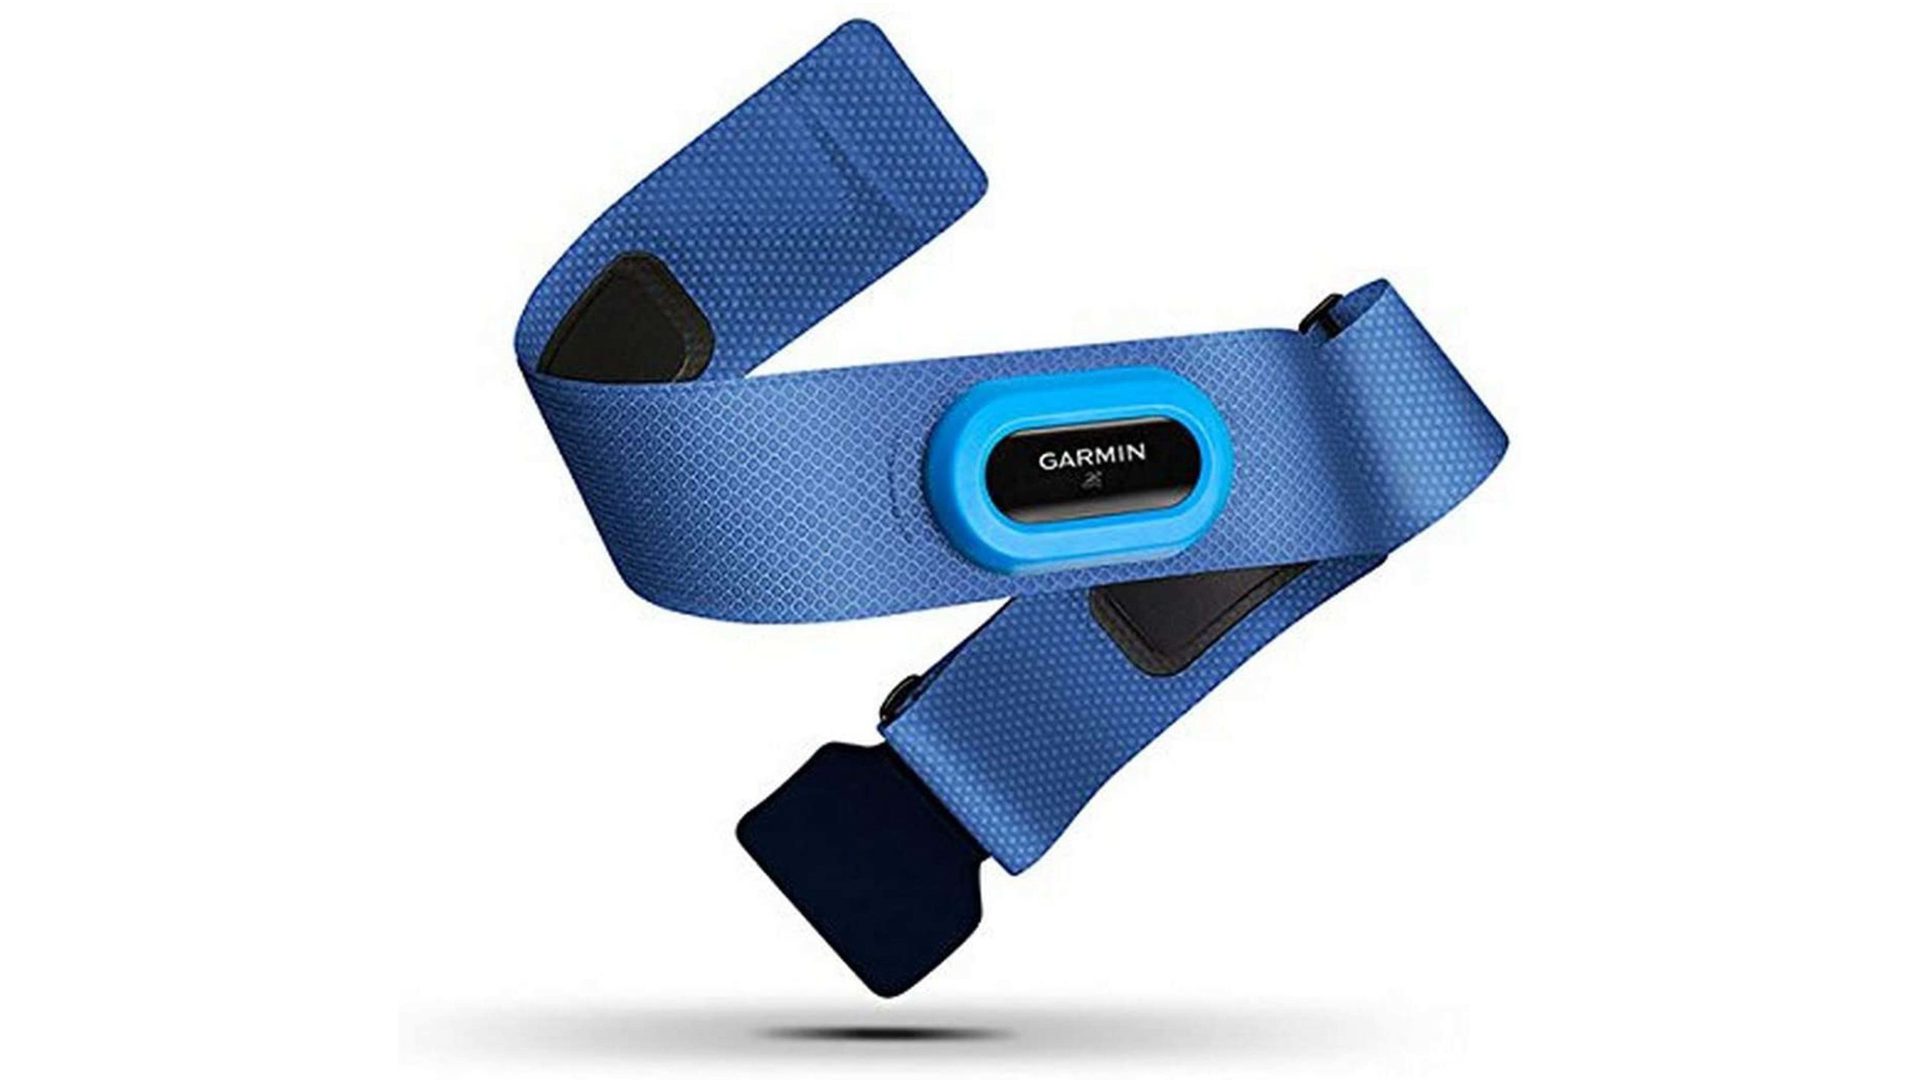 Product shot of a Garmin HRM-Swim, a heart rate monitor chest strap for swimmers.